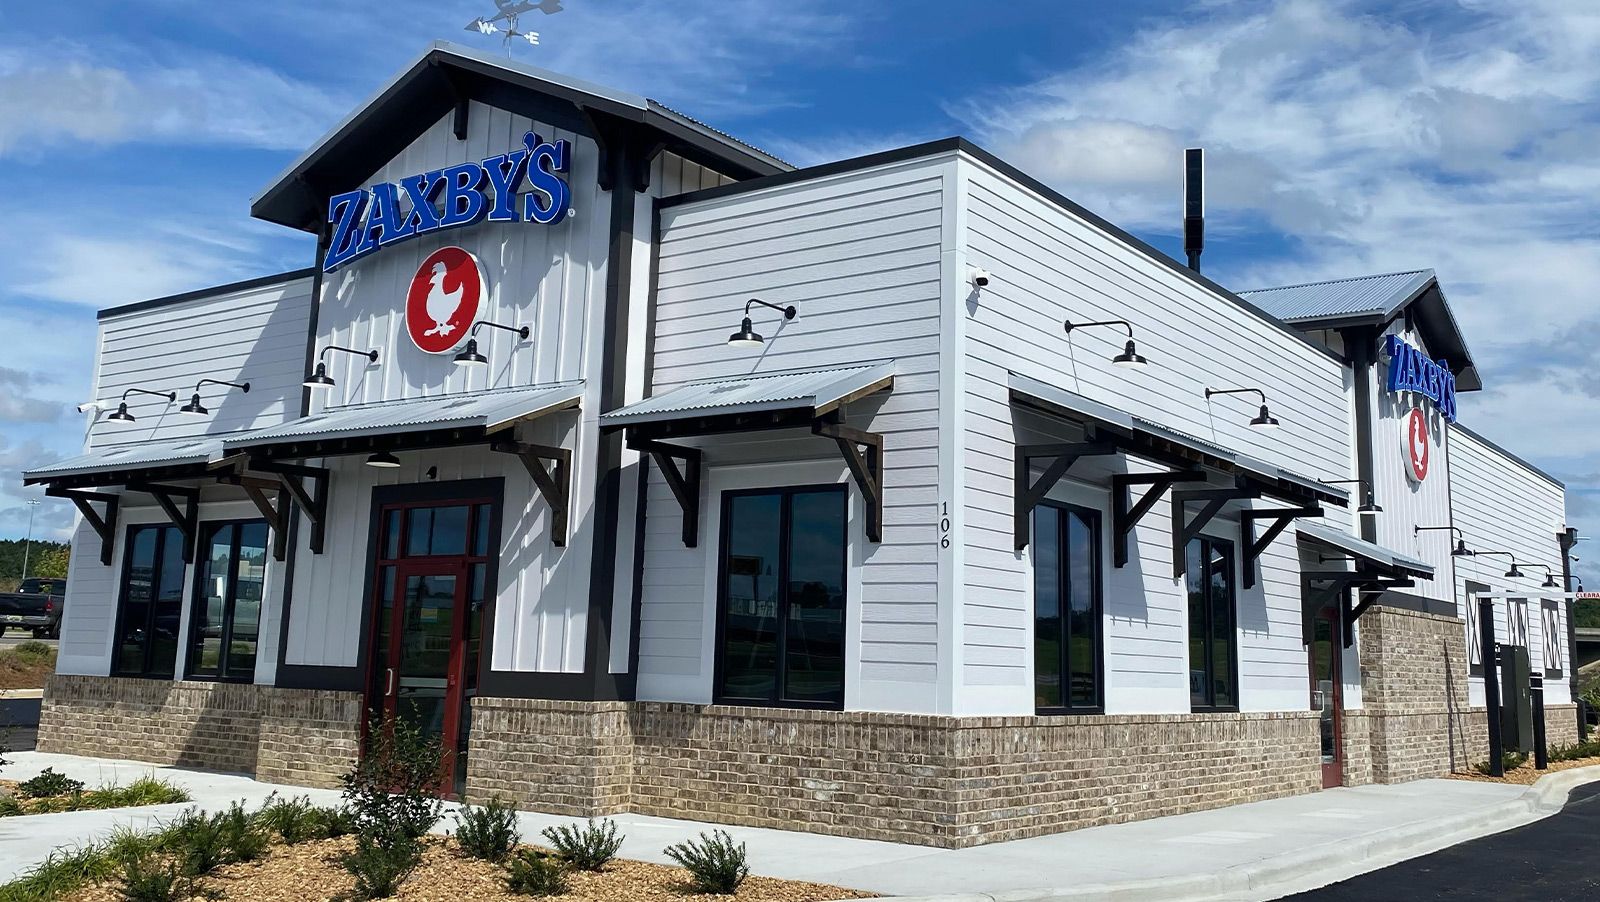 Zaxby's Reopens Restaurant in Dillon, South Carolina